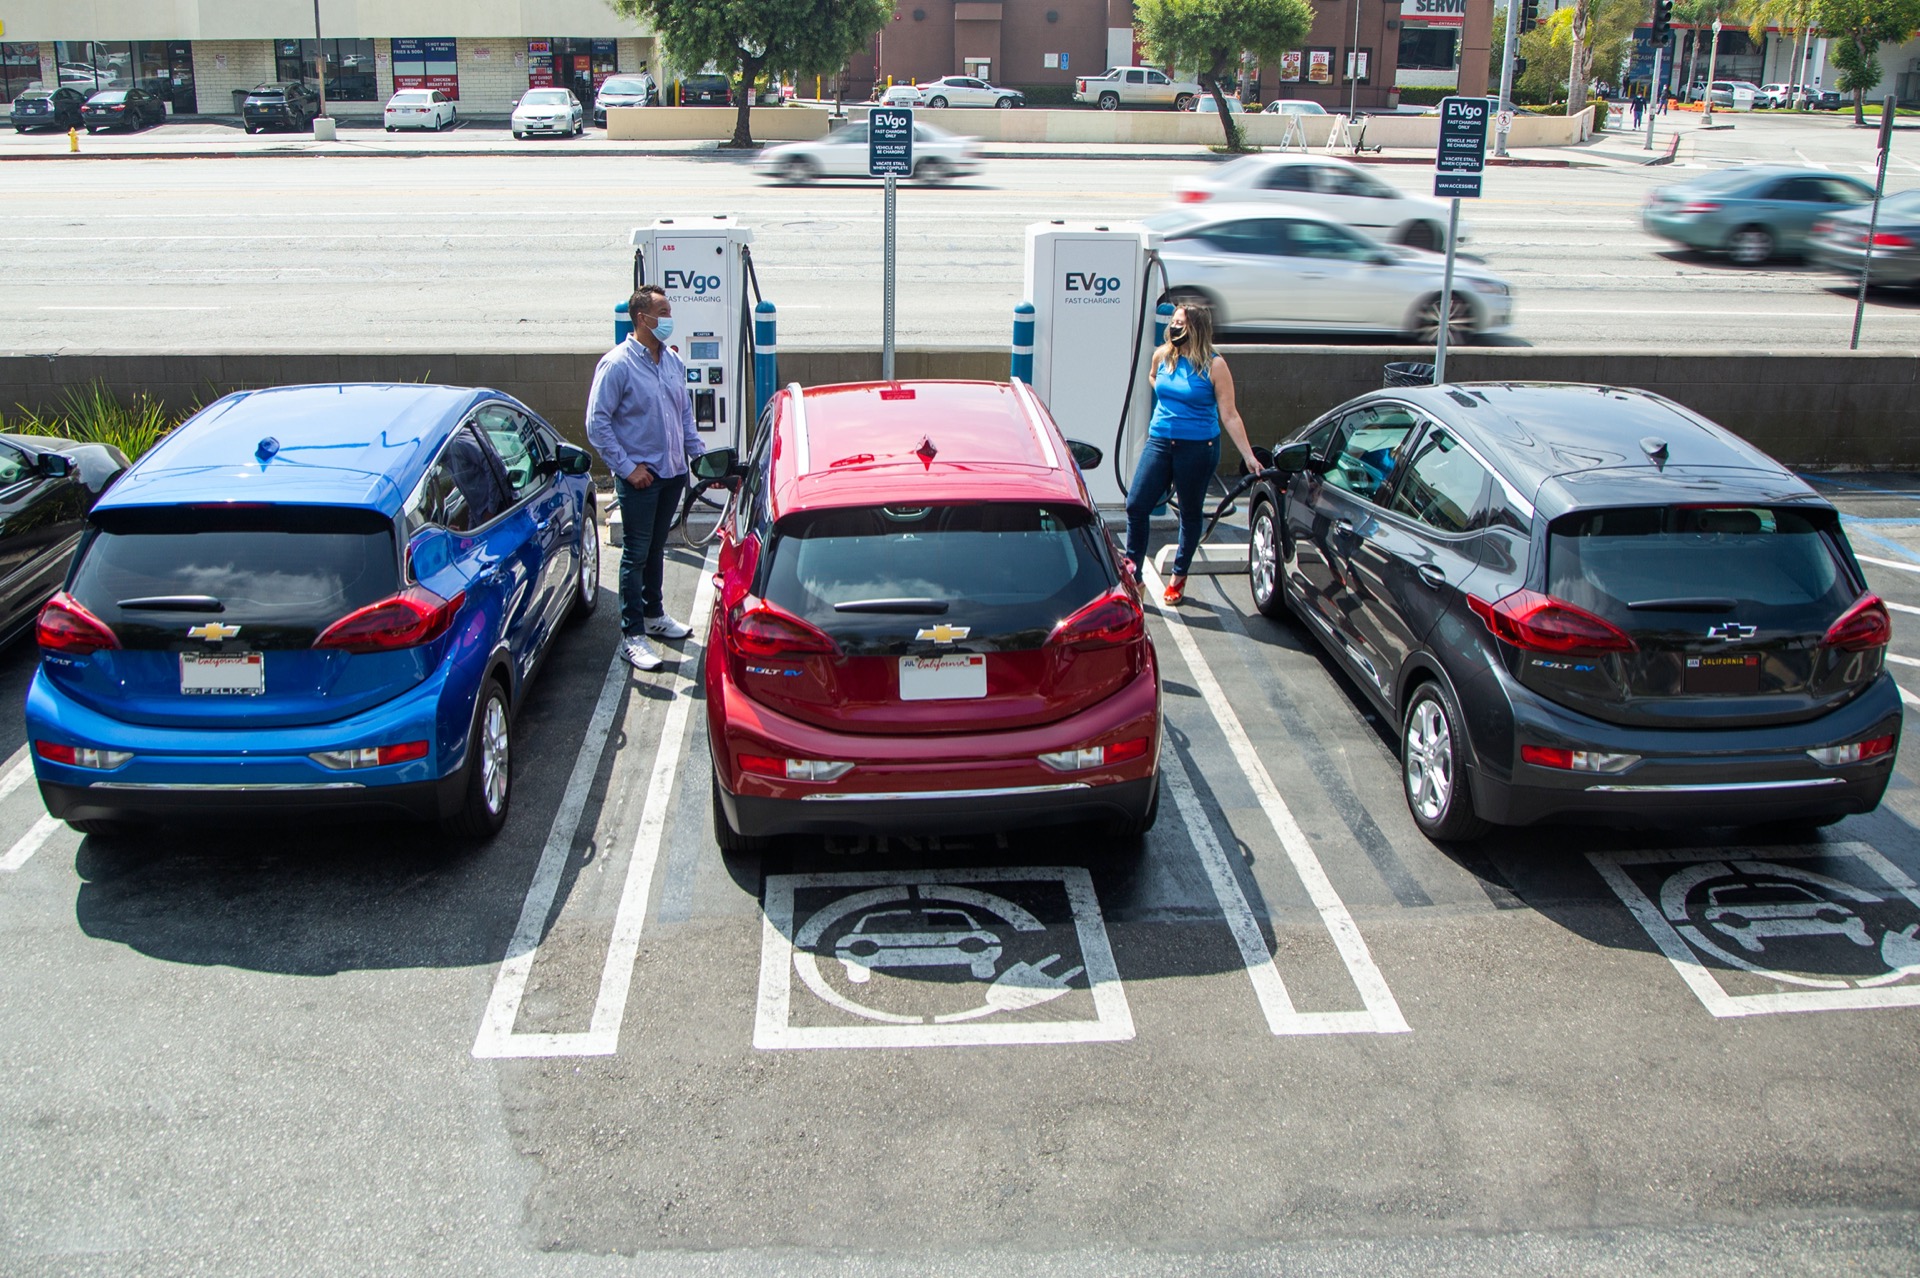 Federal EV charging network: $5 billion over five years, now states have to submit plansFederal EV charging network: $5 billion over five years, now states have to submit plans